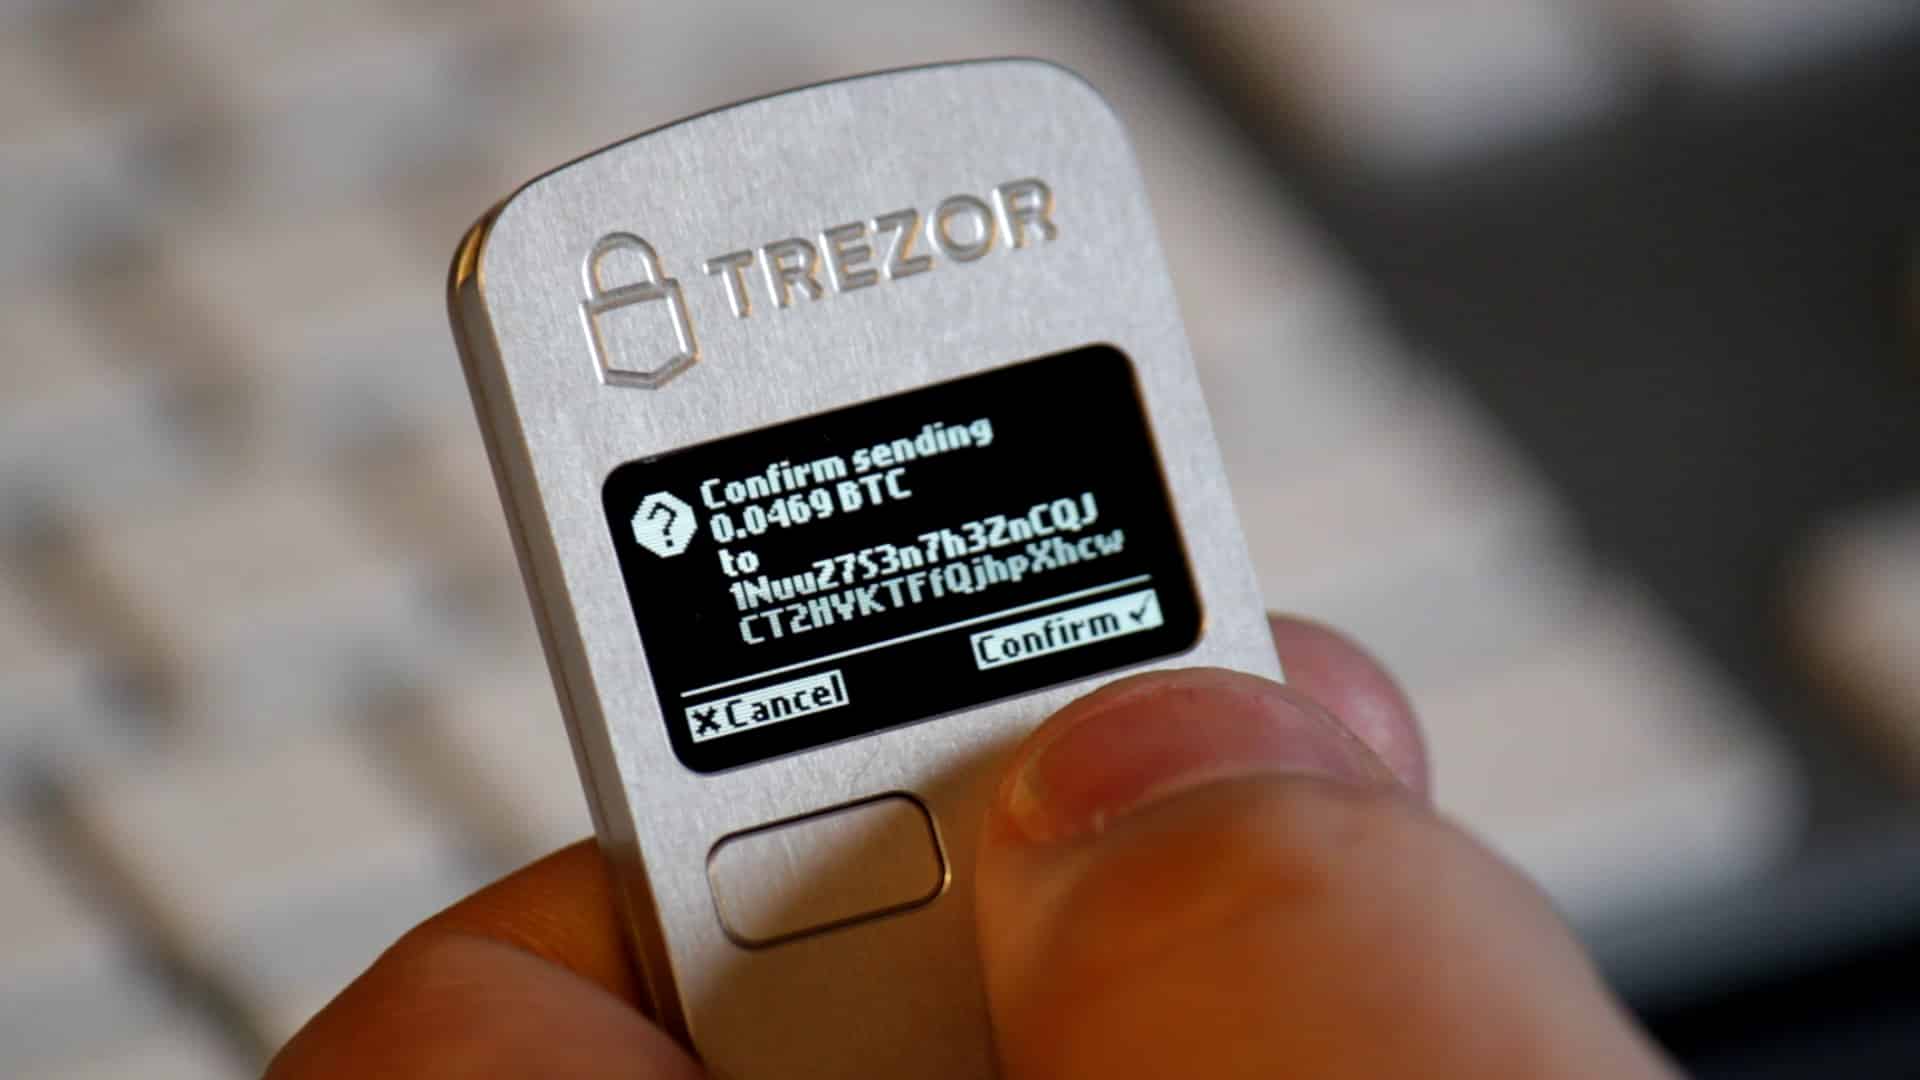 The Trezor Bitcoin wallet offers a range of advanced security features and innovative user controls via the Trezor Suite